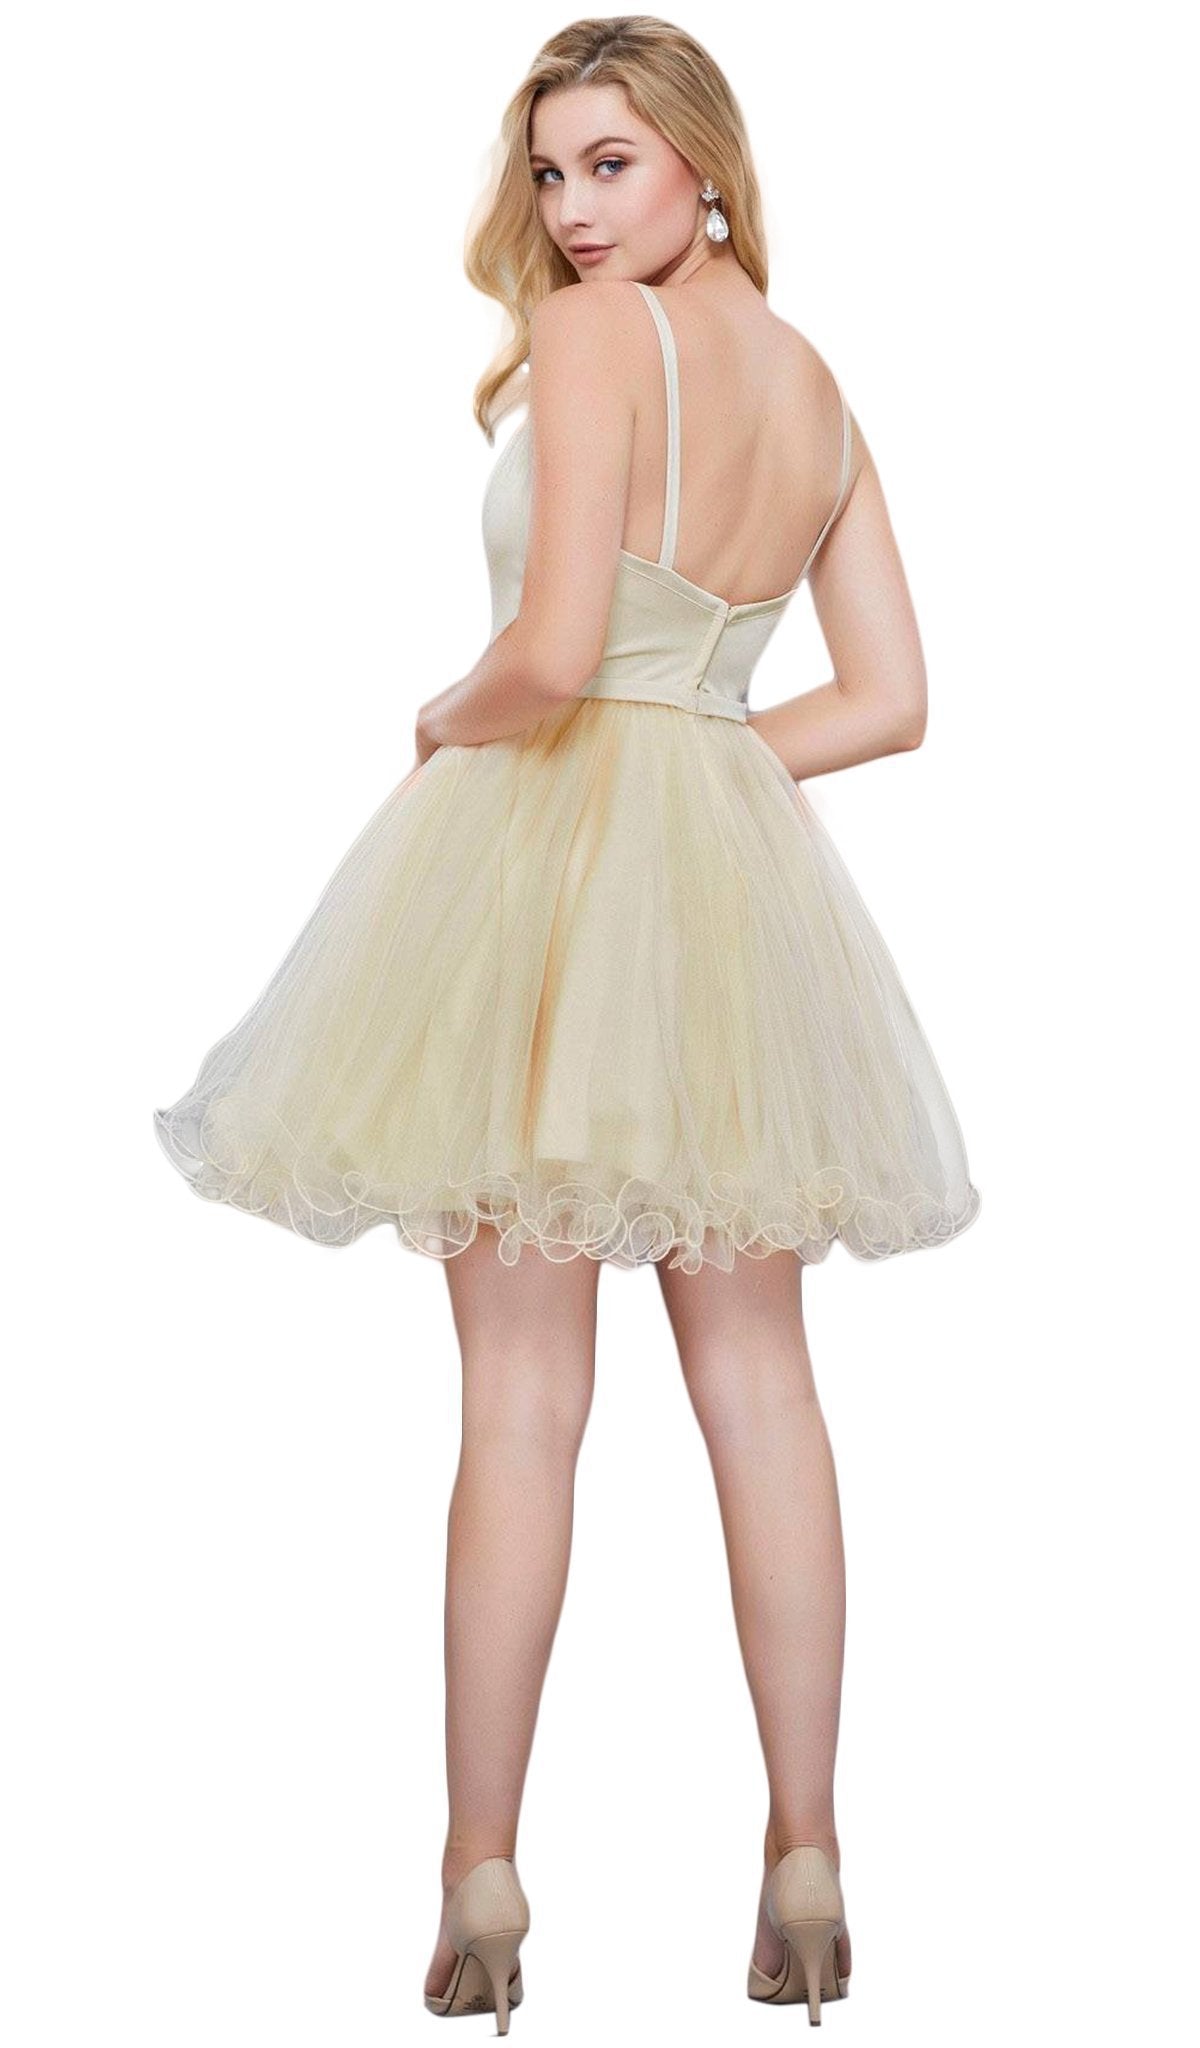 Nox Anabel - 6353 Sleeveless Straight-Across Neck Chiffon Cocktail Dress Special Occasion Dress